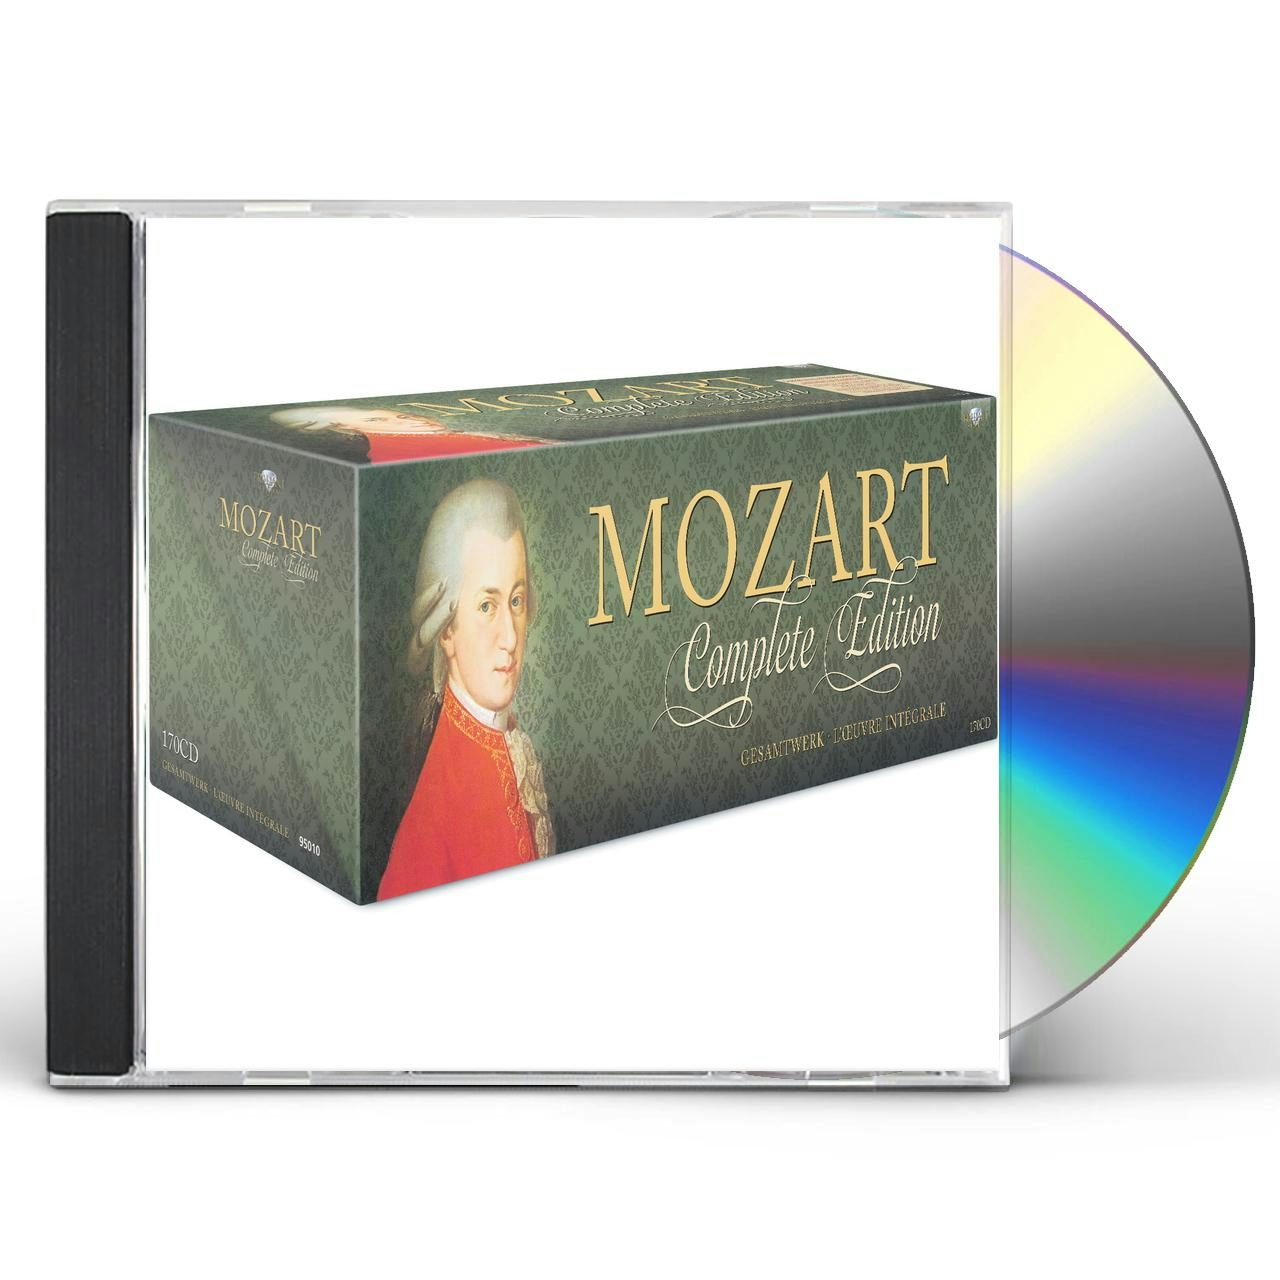 Wolfgang Amadeus Mozart COMPLETE EDITION CD